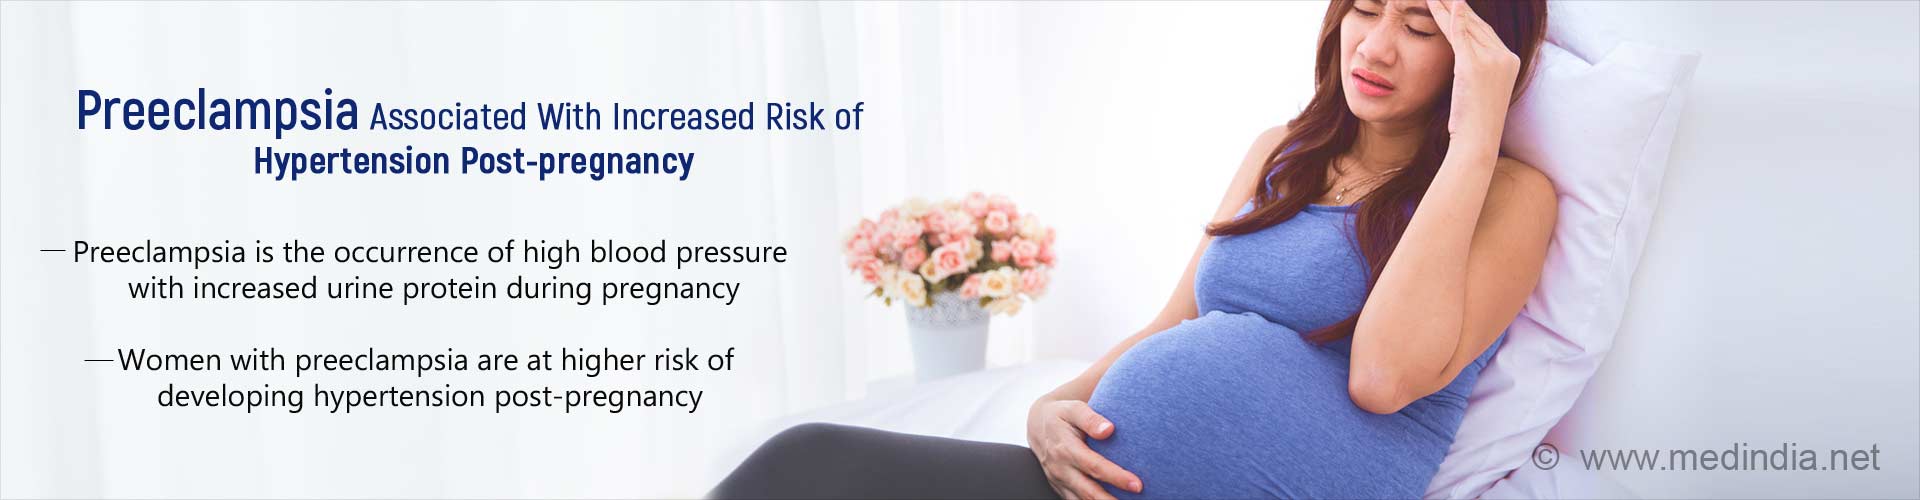 preeclampsia associated with increased risk of hypertension post-pregnancy
- preeclampsia is the occurrence of high blood pressure with increased urine during pregnancy
- women with preeclampsia are at higher risk of developing hypertension post-pregnancy